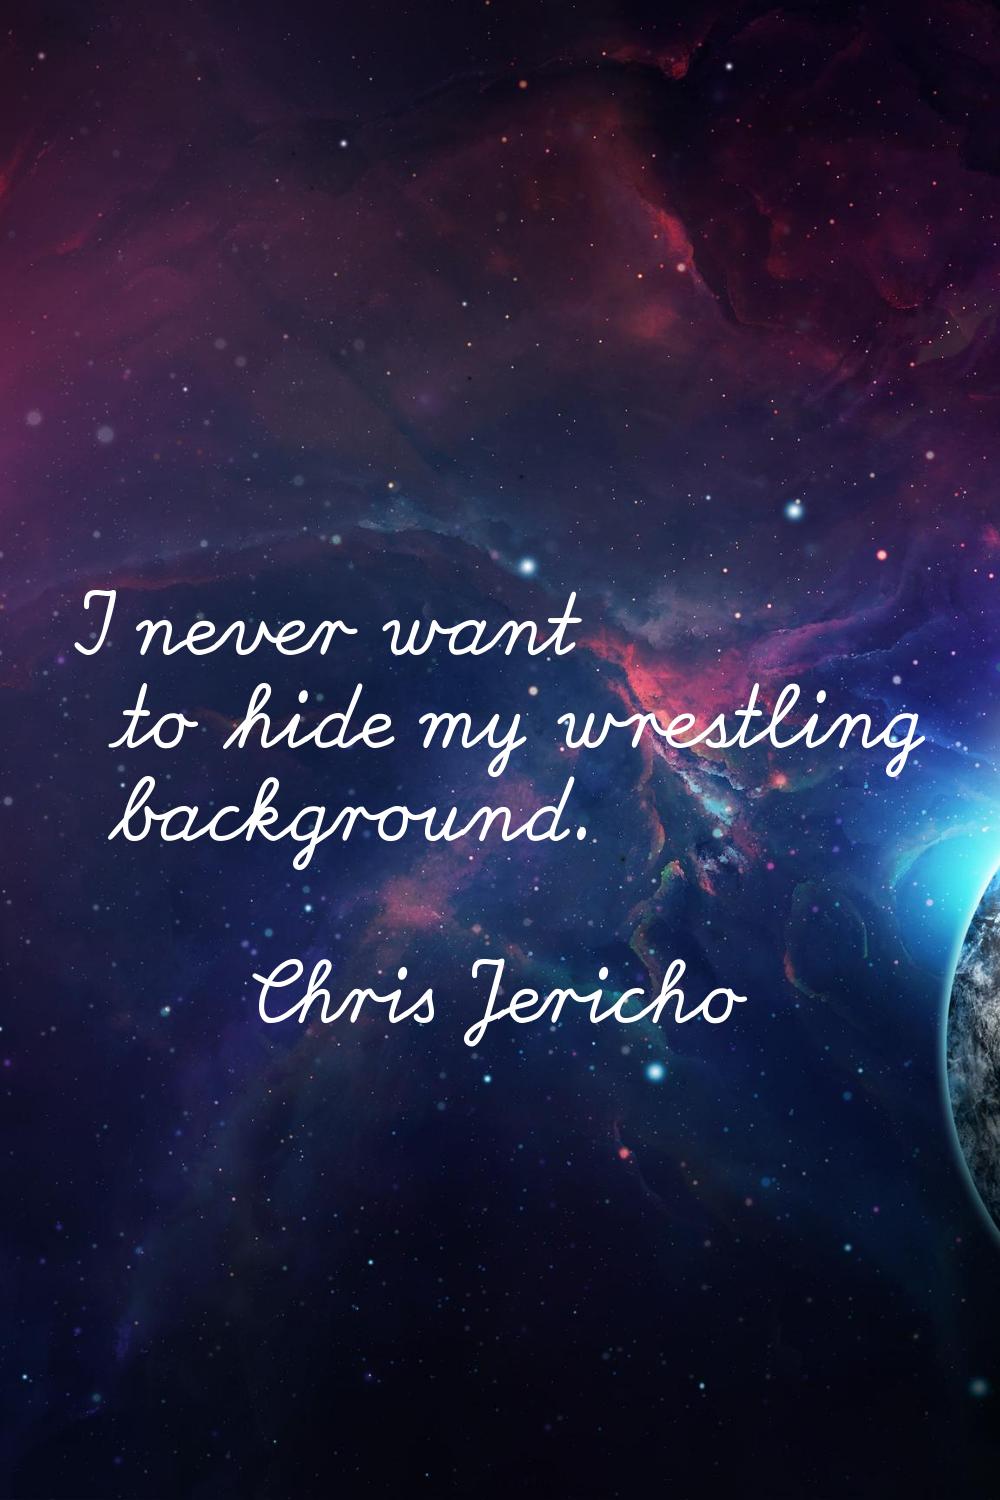 I never want to hide my wrestling background.